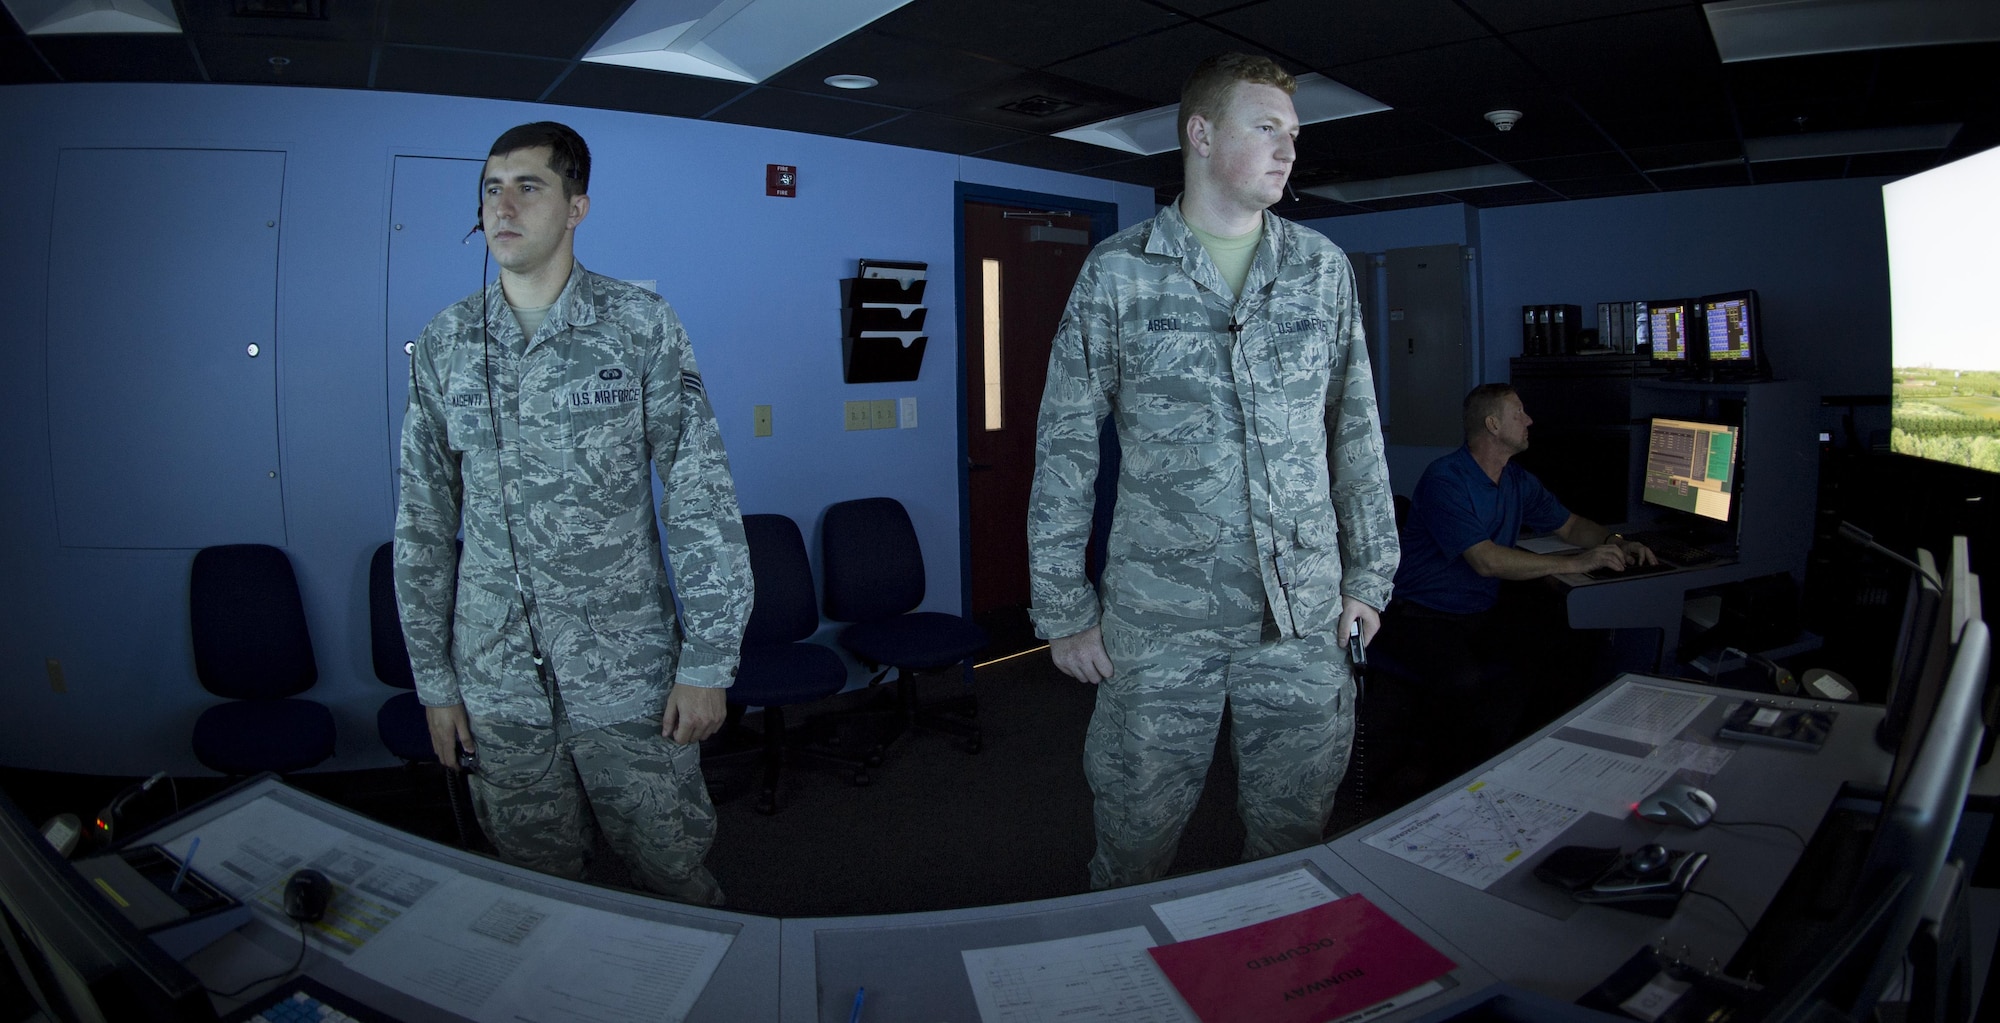 U.S. Air Force Senior Airman Vincent Magenti, an air traffic controller, and Airman 1st Class Tyler Abell, an air traffic controller apprentice, both assigned to the 6th Operations Support Squadron, perform an air traffic control simulator scenario at MacDill Air Force Base, Fla., Oct. 27, 2017. The simulator uses five screens and nine computers to provide the training to air traffic controllers on a daily basis. (U.S. Air Force photo by Senior Airman Mariette Adams